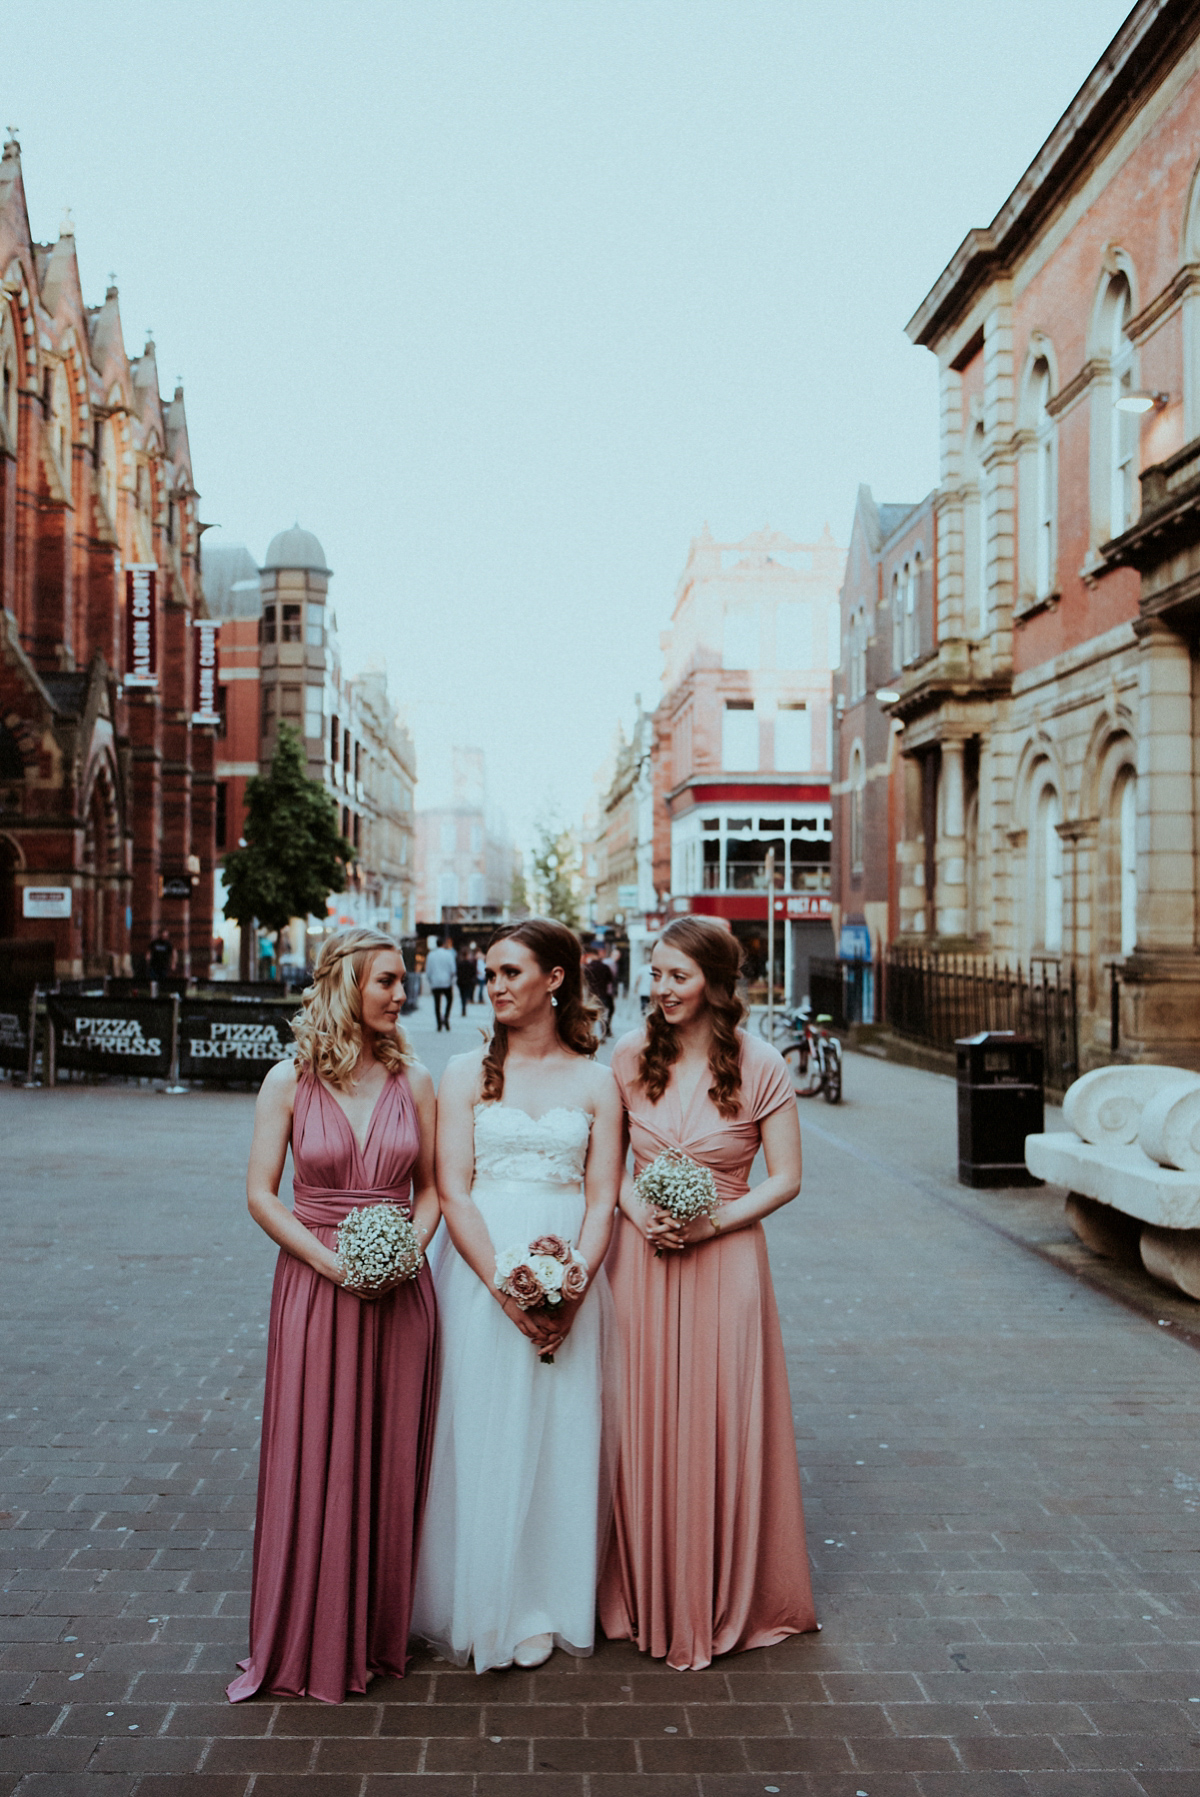 Bride Amy wore a Grace Loves Lace gown for her chic, city wedding in Leeds. Photography by Shutter Go Click.